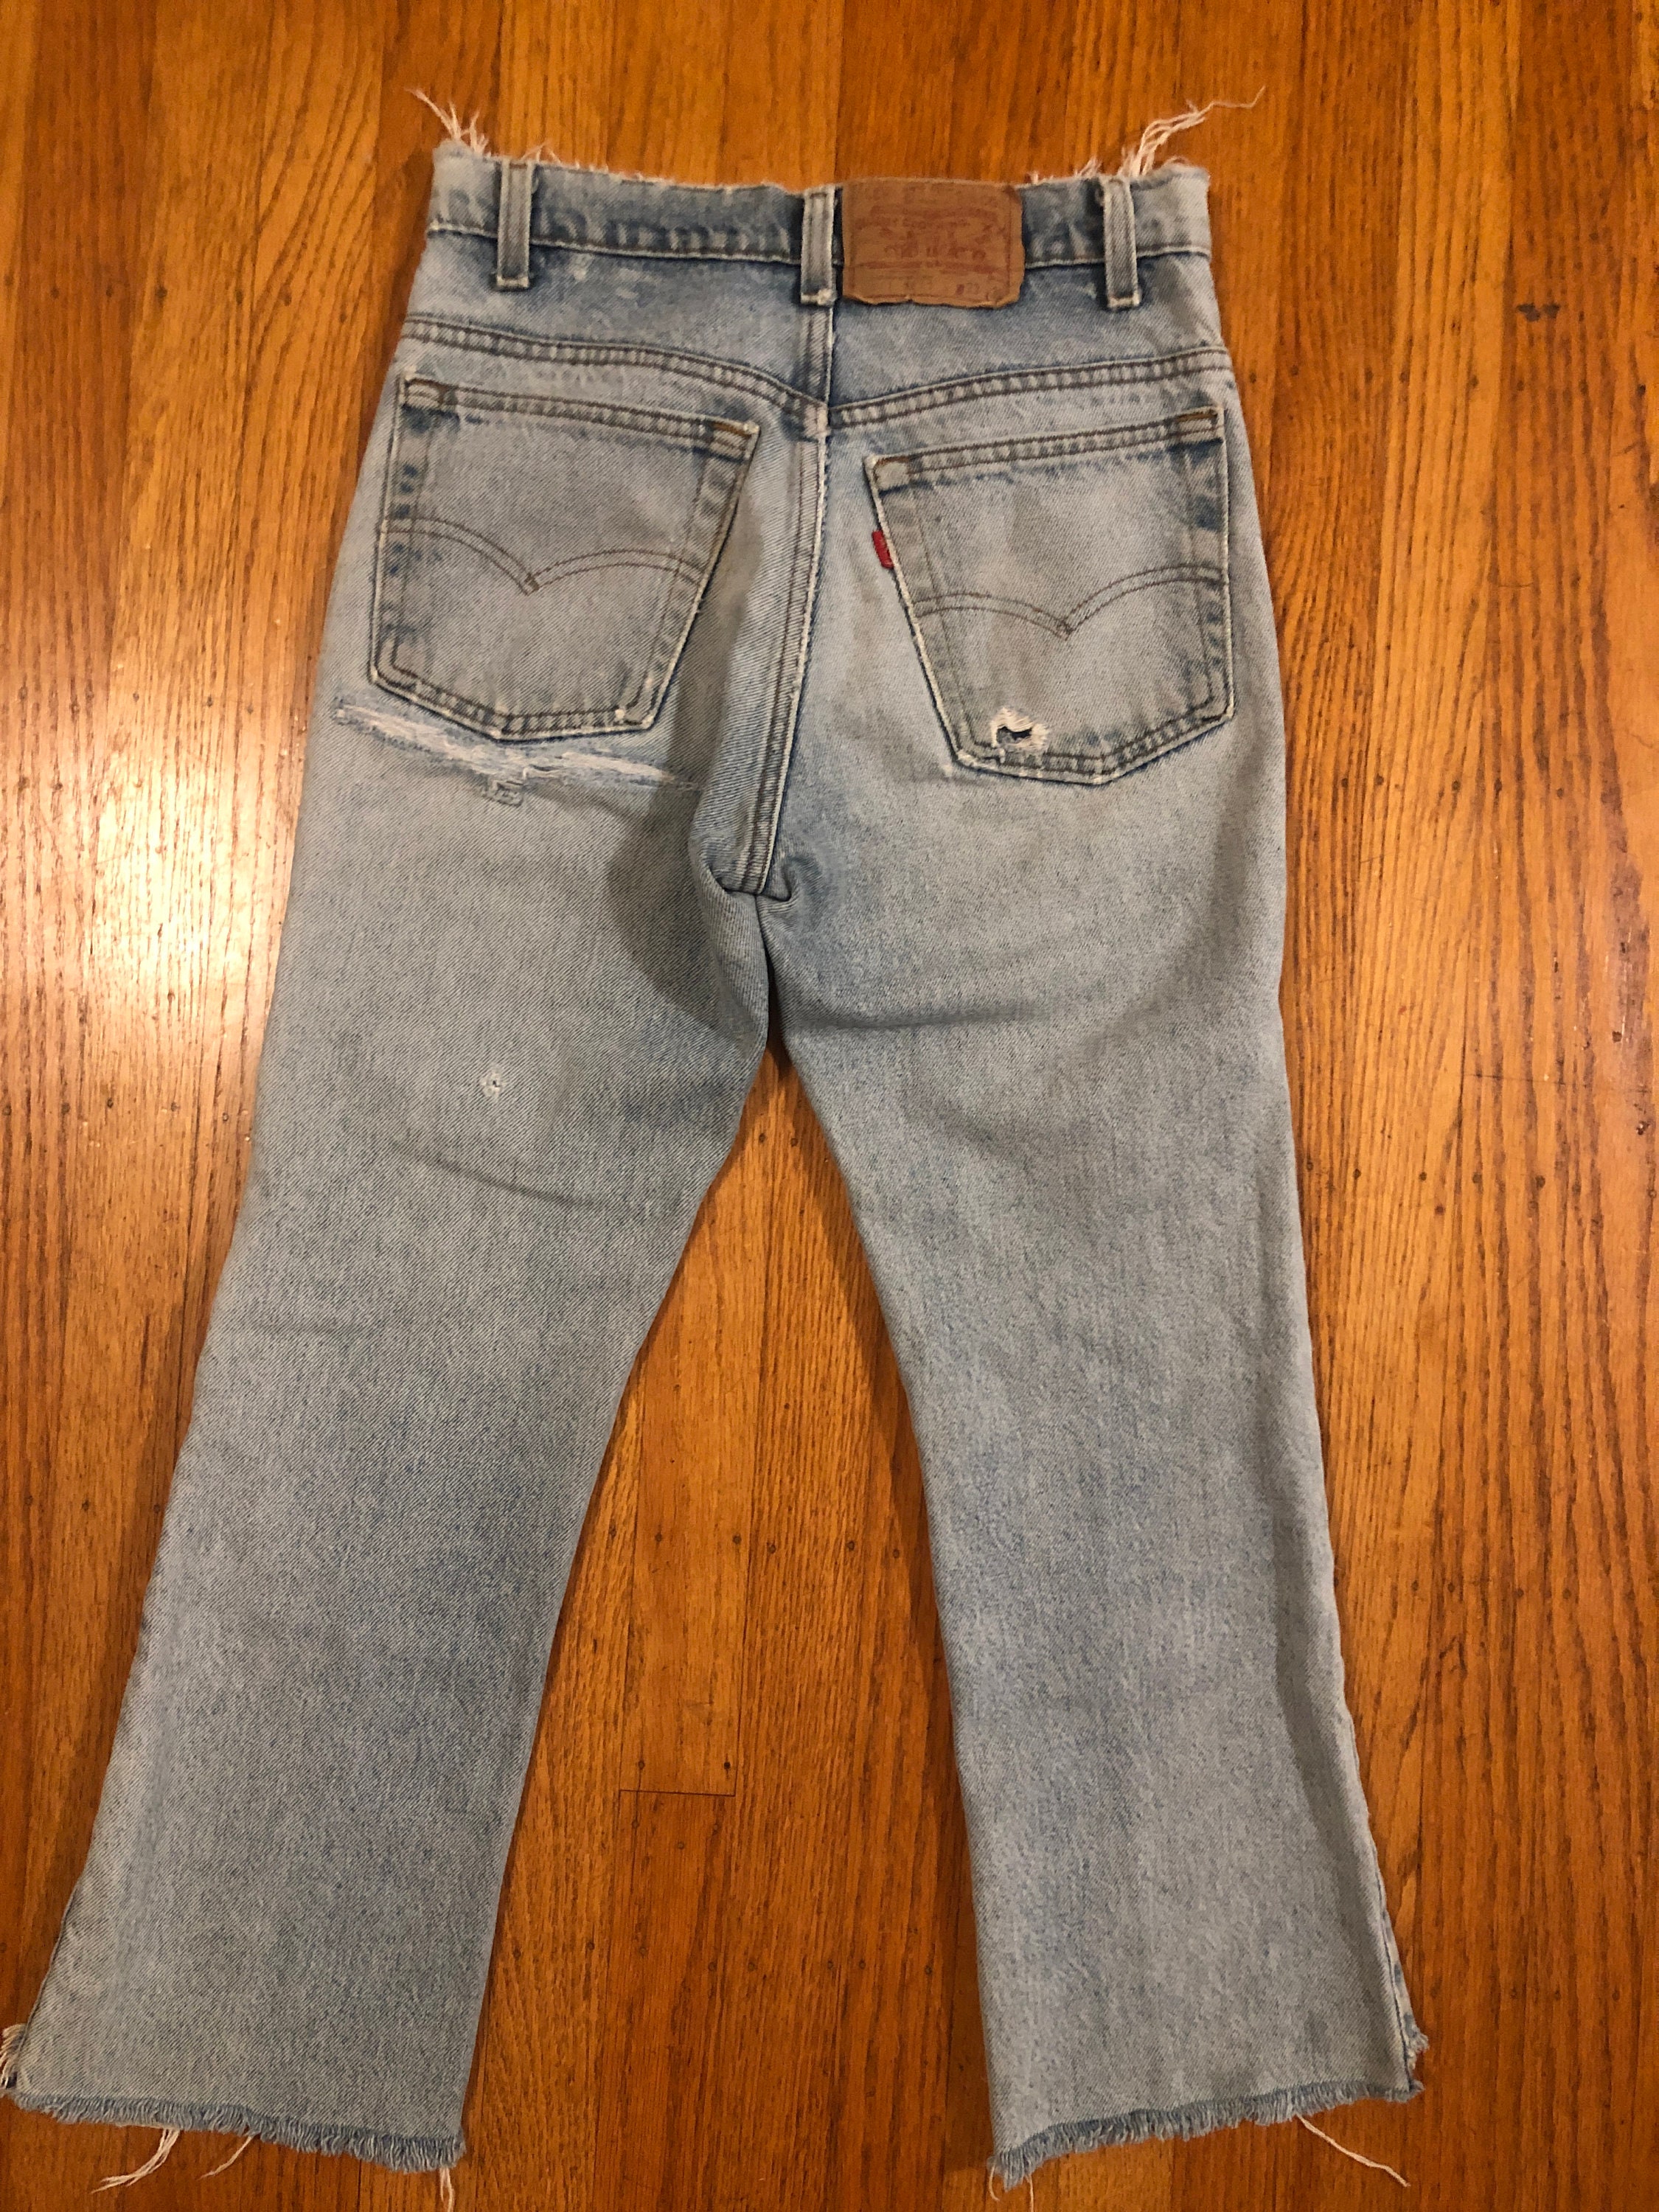 Perfectly Worn Vintage Levis 517s - Etsy